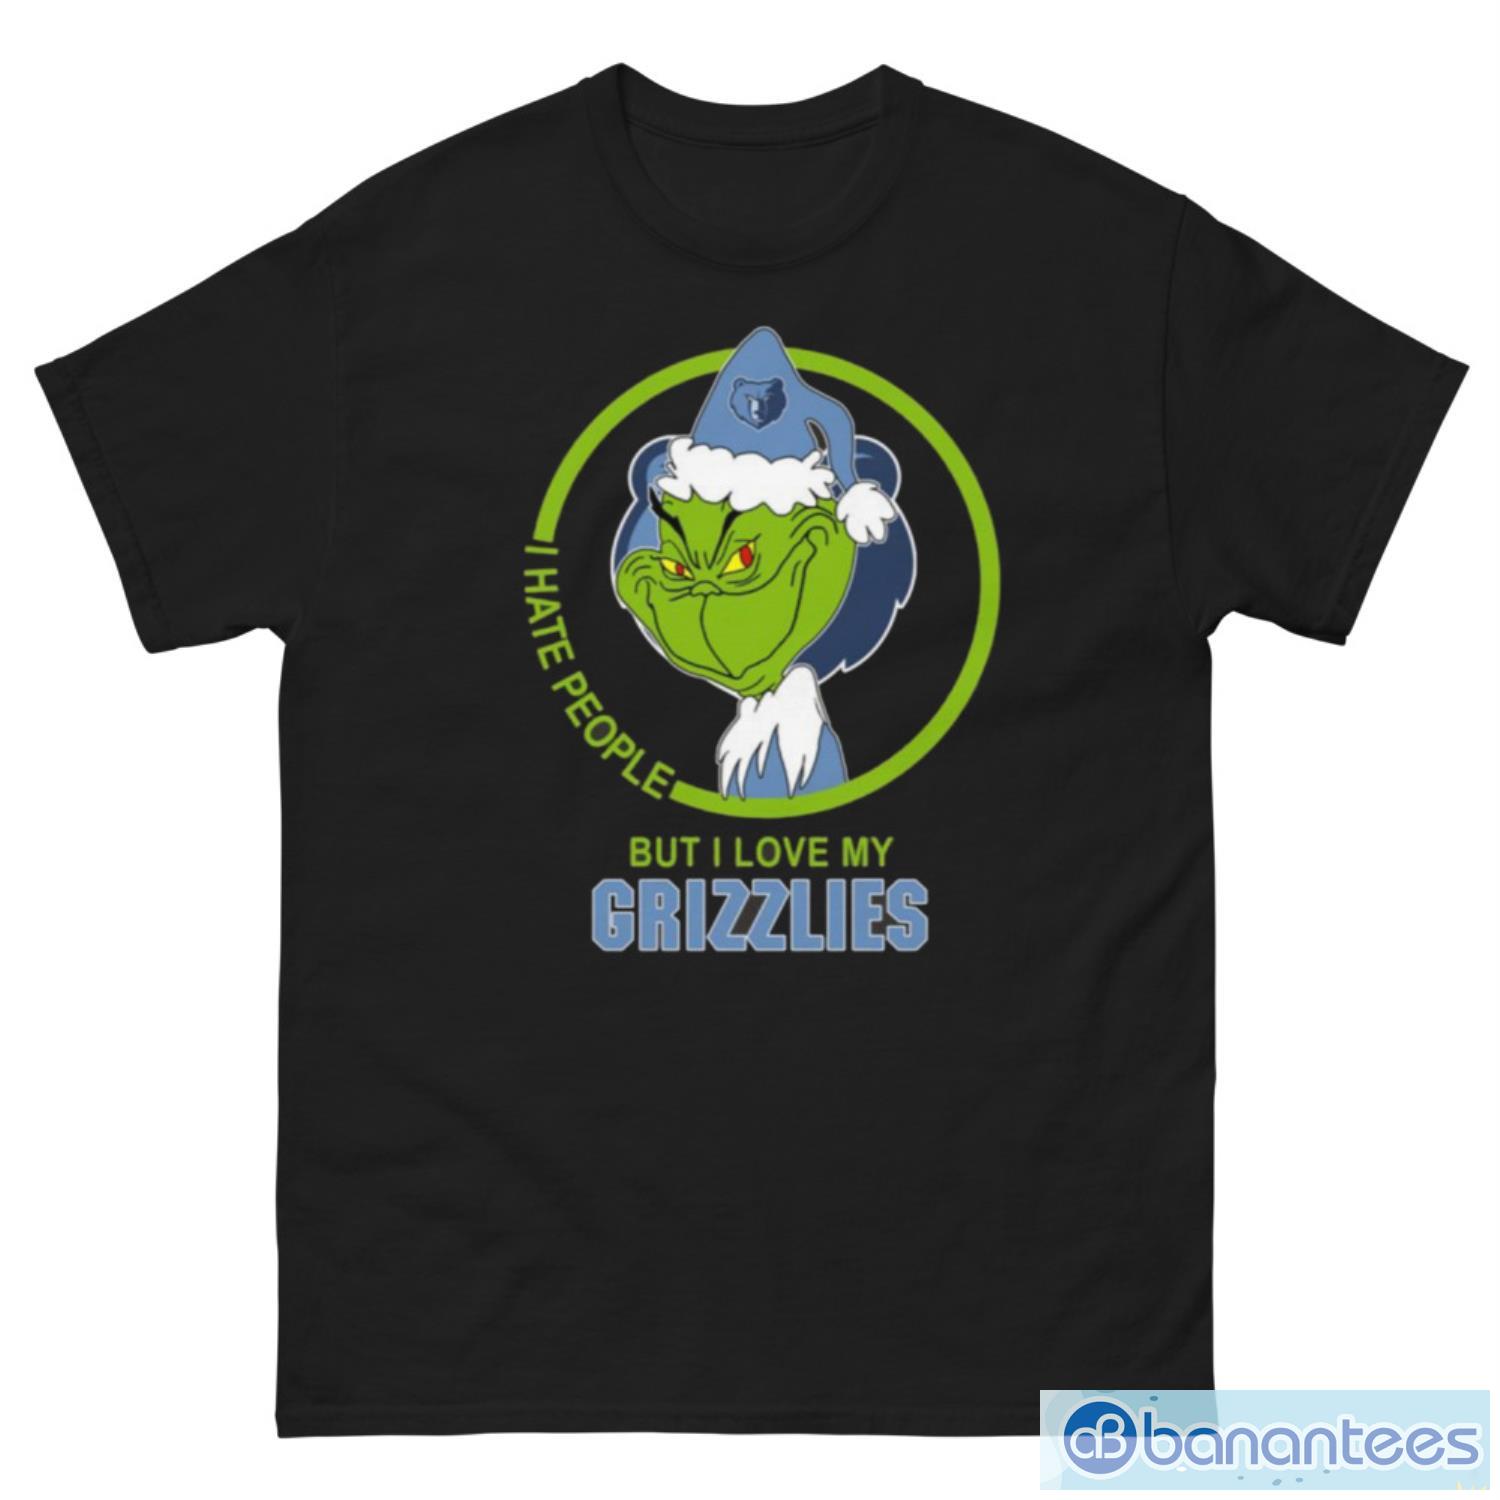 Memphis Grizzlies NBA Christmas Grinch I Hate People But I Love My Favorite Basketball Team T Shirt - G500 Men’s Classic Tee